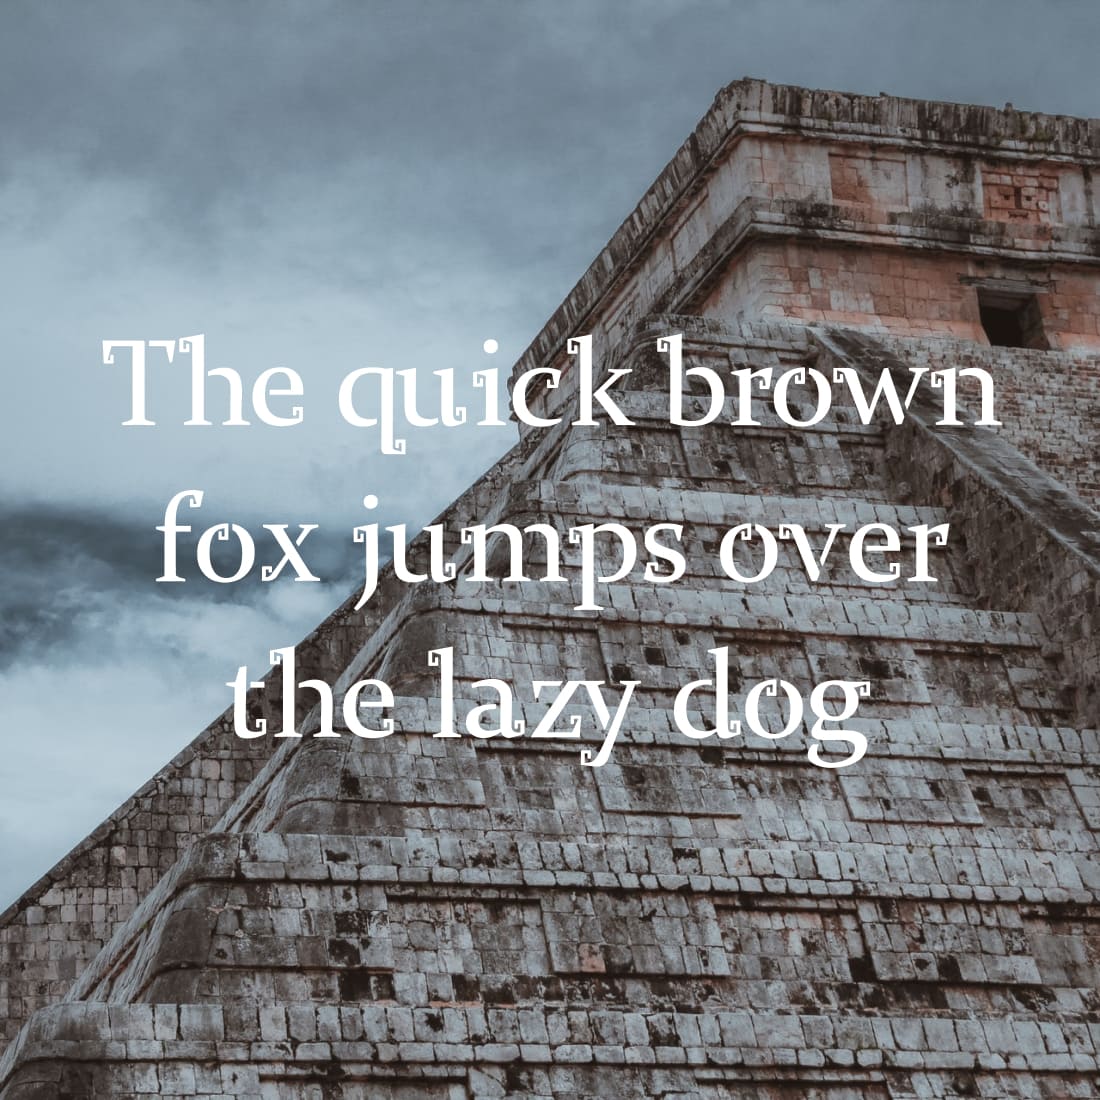 Mayan Typography maya free font Collage image with Example phrase.